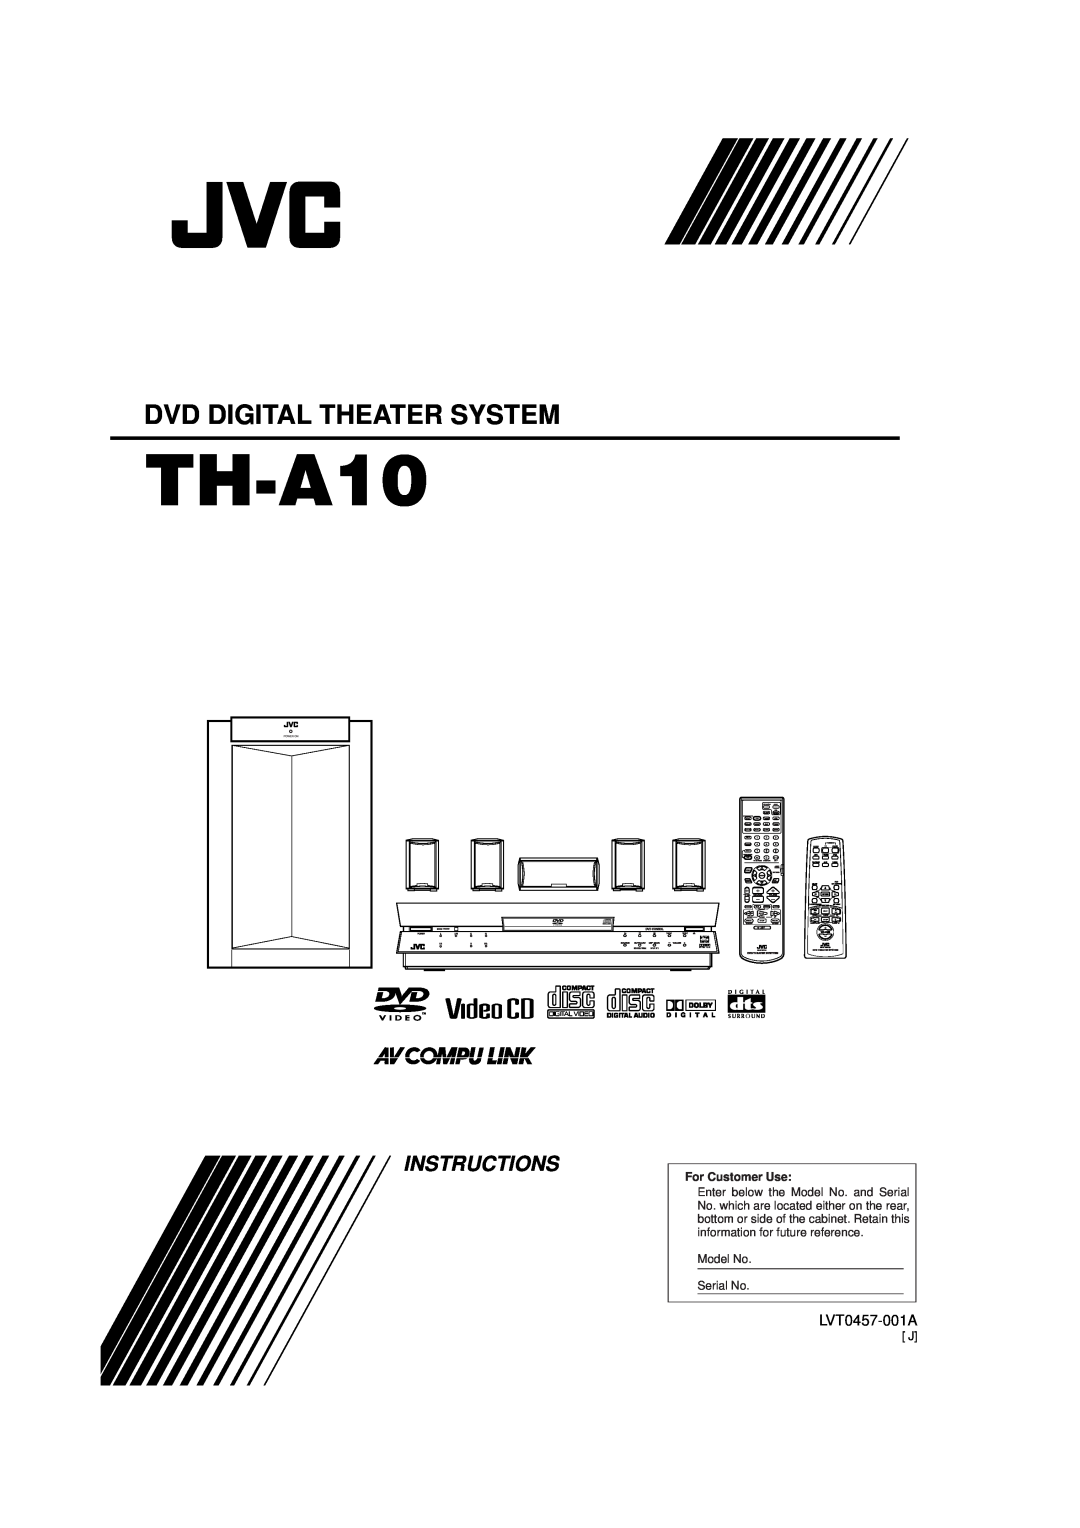 JVC TH-A10 manual LVT0457-001A, Dvd Digital Theater System, Instructions, For Customer Use 